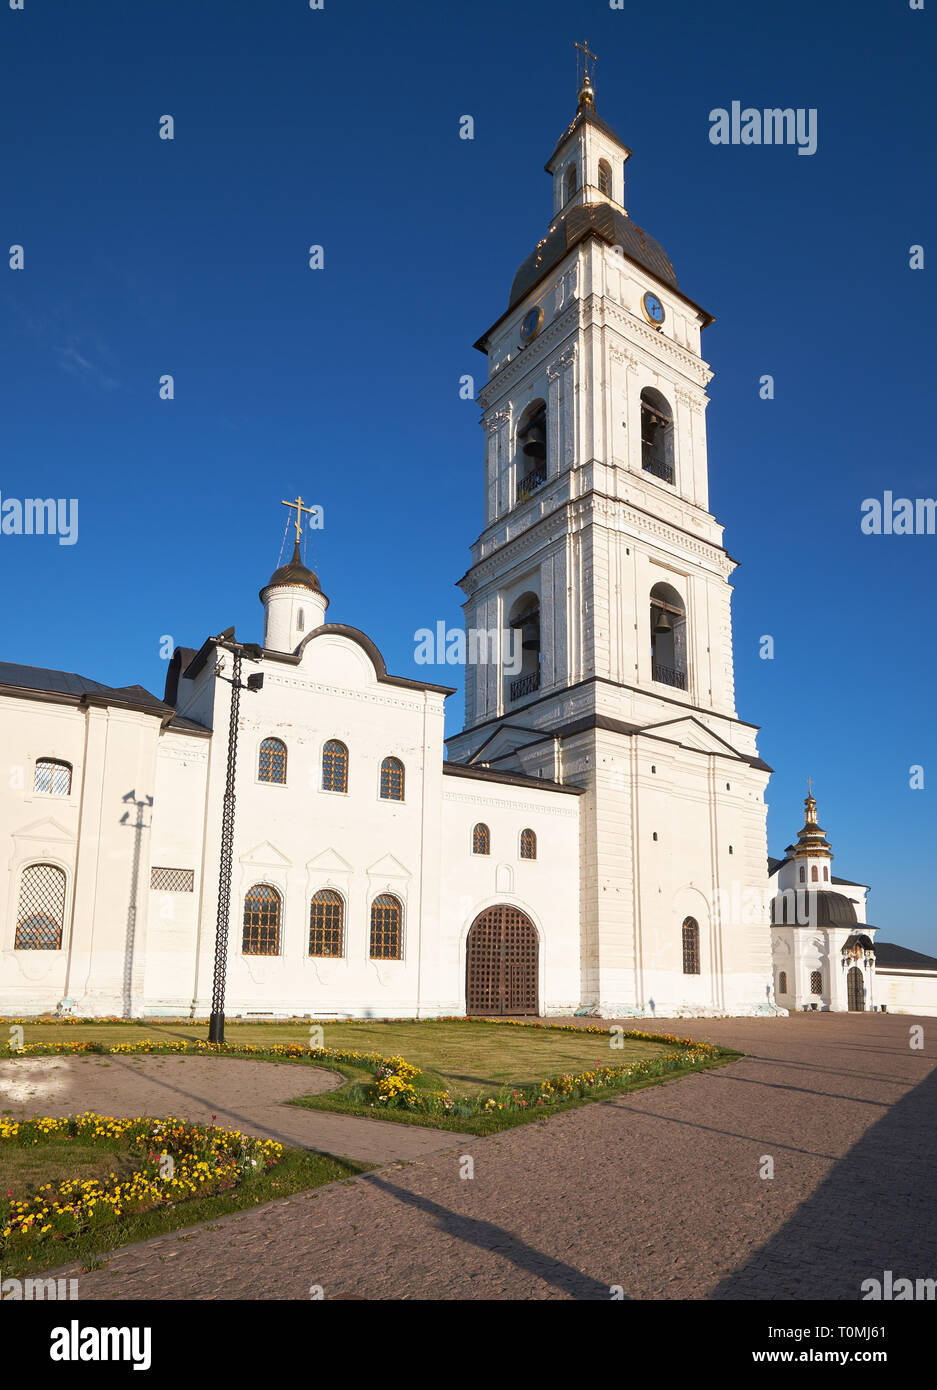 The view of the tall neoclassical bell tower and church sacristy of Tobolsk Kremlin. Tobolsk. Russia Stock Photo